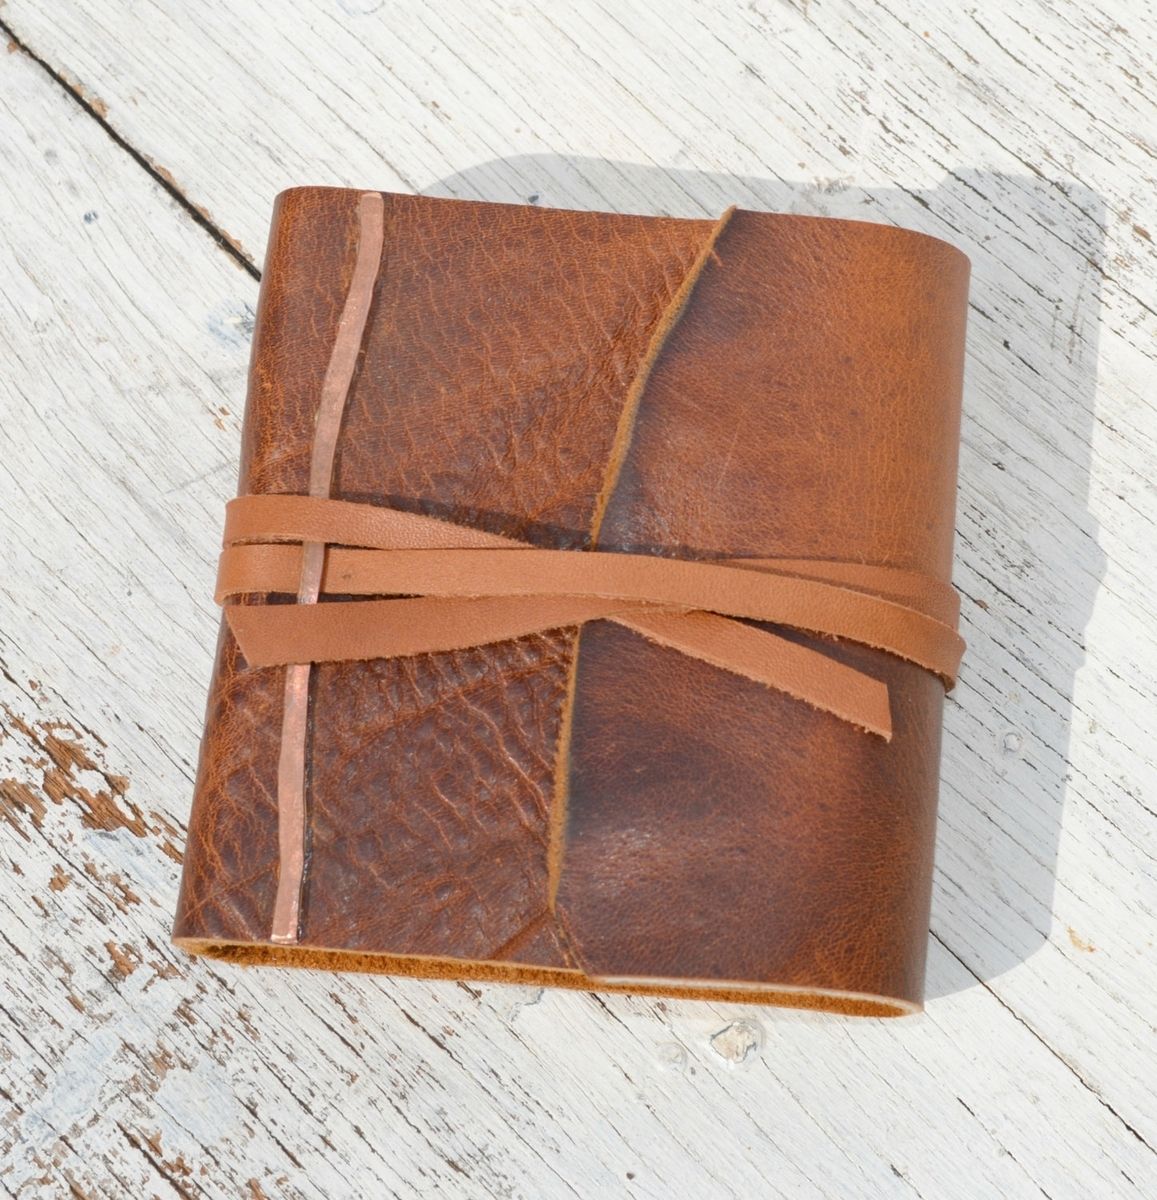 Hand Crafted Personalized Leather Journal Engraved Bound Handmade Pocket Journal Mini Travel